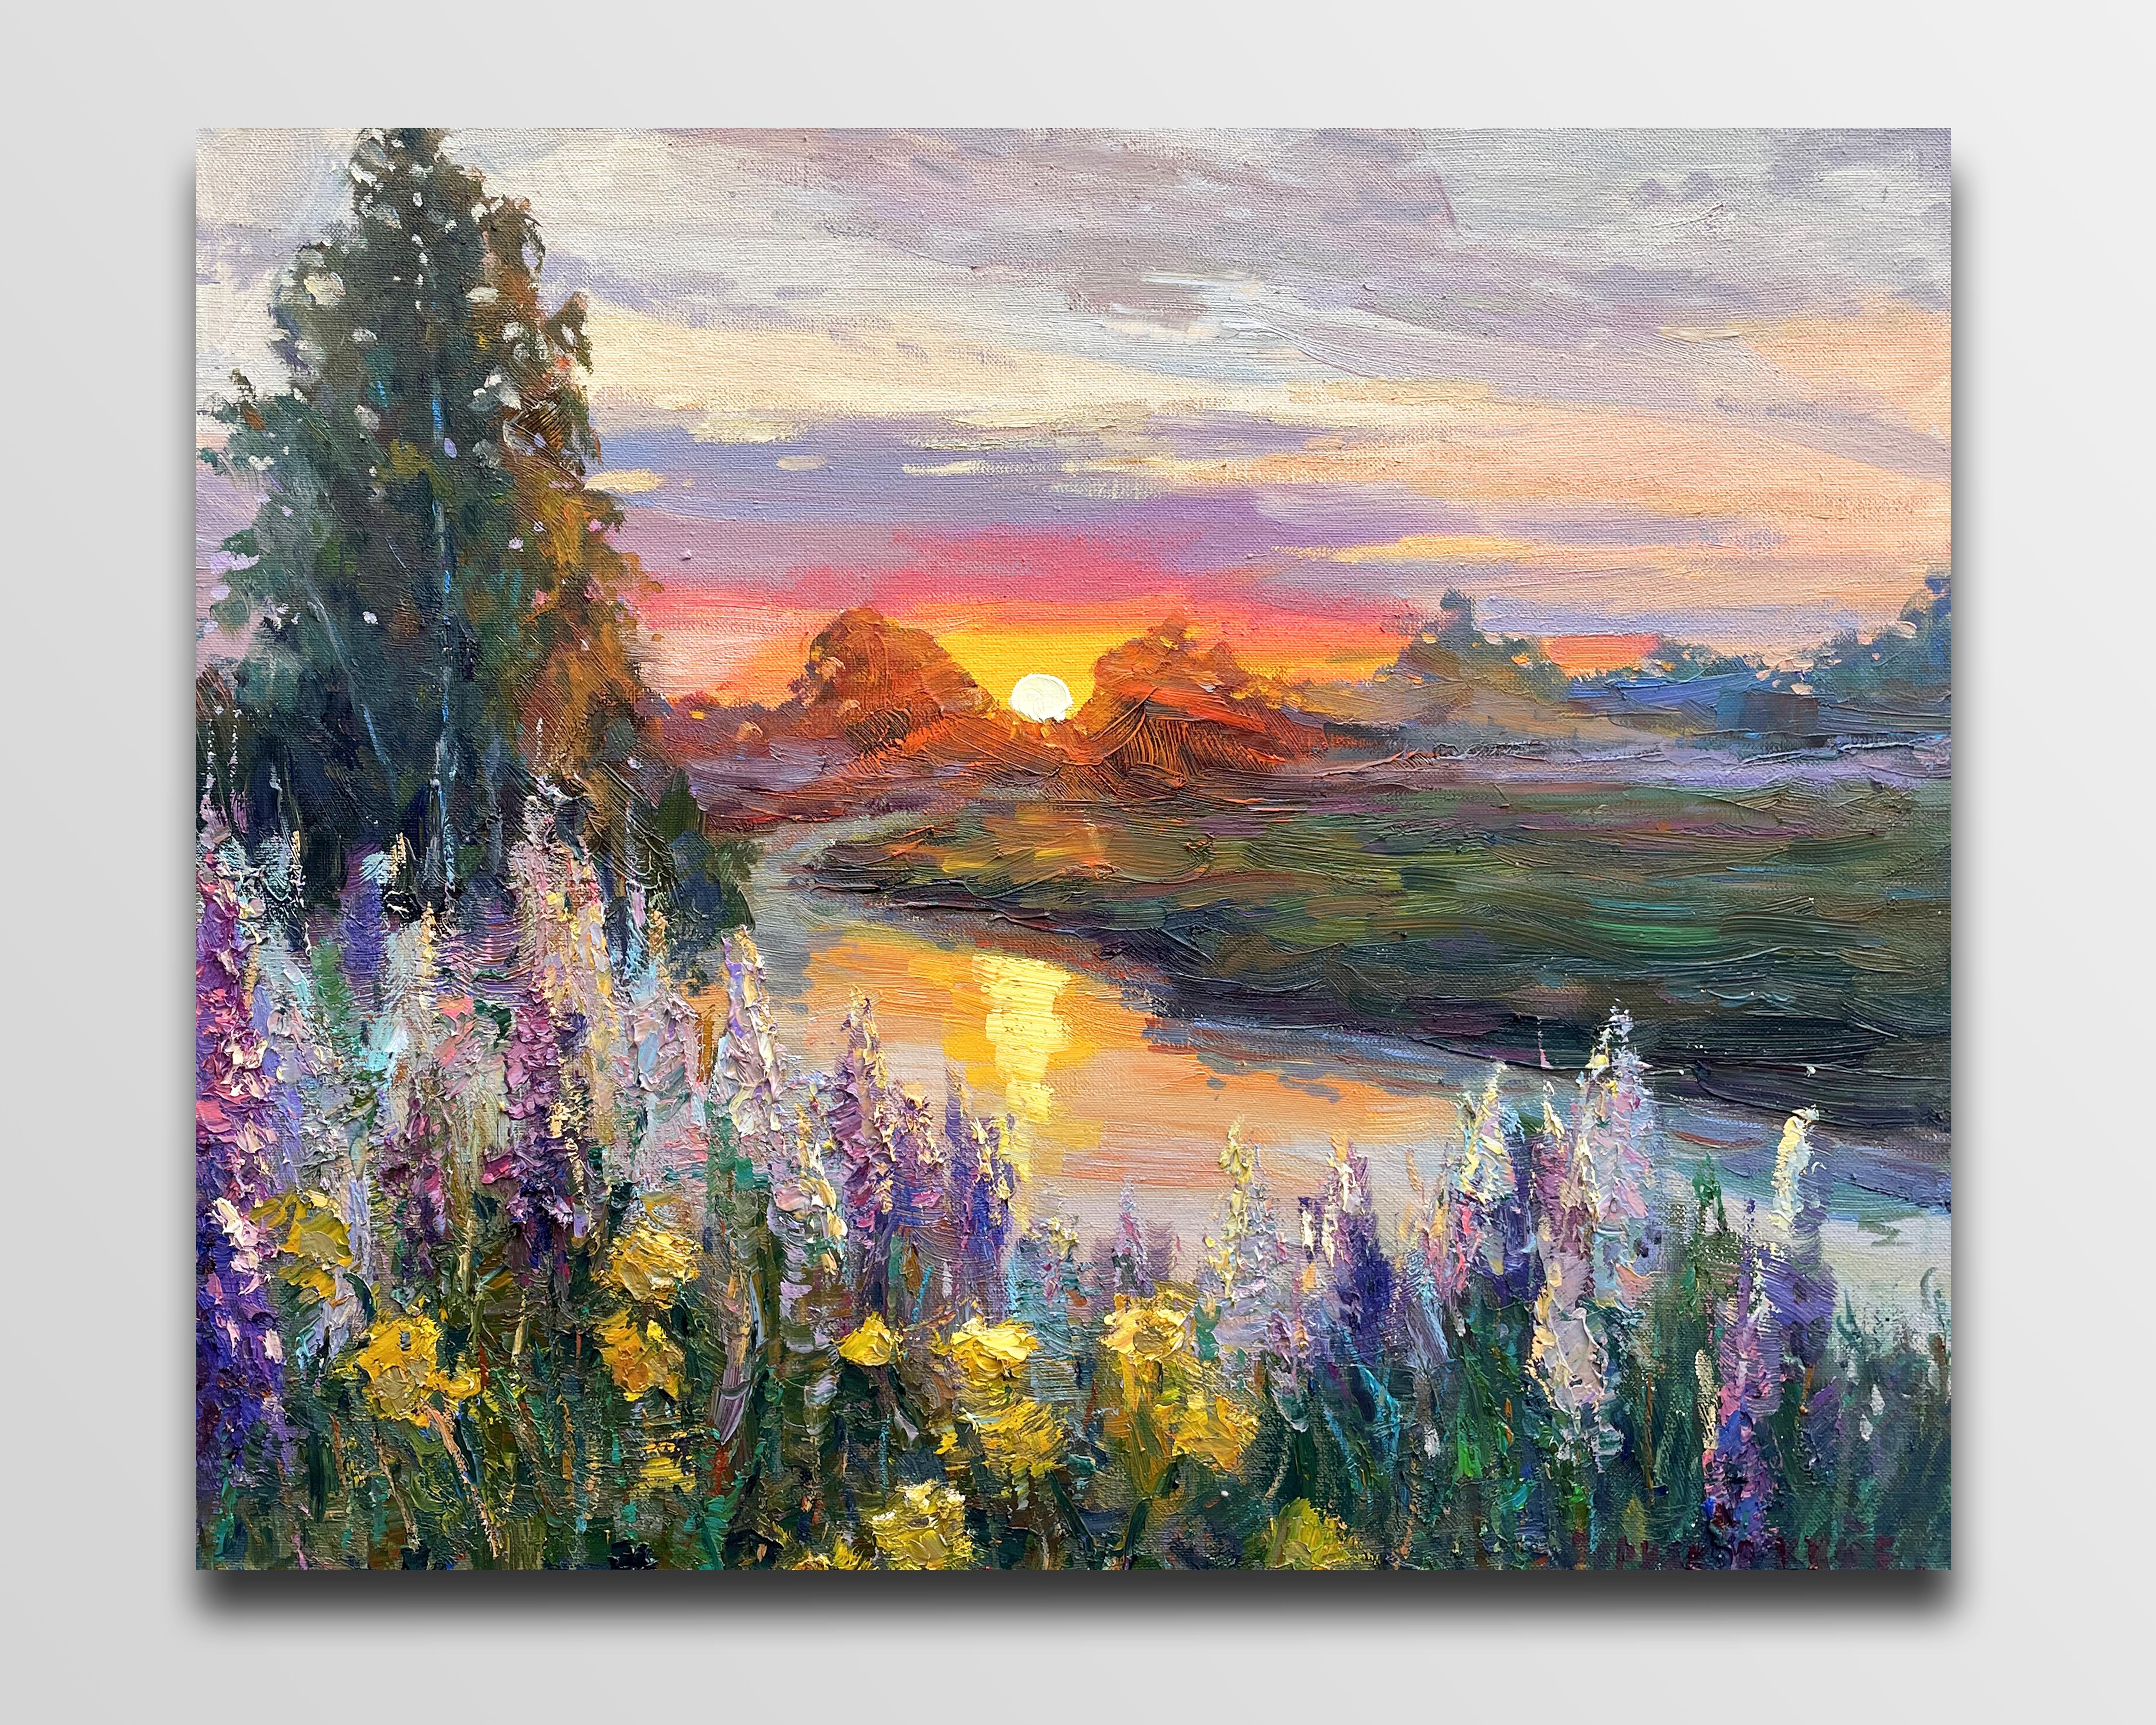 Original Oil painting by Ukrainian artist Evgeny Chernyakovsky    "Sunset by the river"  50.0 X 60.0 CM / 19.6 X 23.6IN  HIGH QUALITY oil on canvas  Signed on the front and back  Dated 2022  Good condition  GUARANTEE OF AUTHENTICITY :: Painting ::